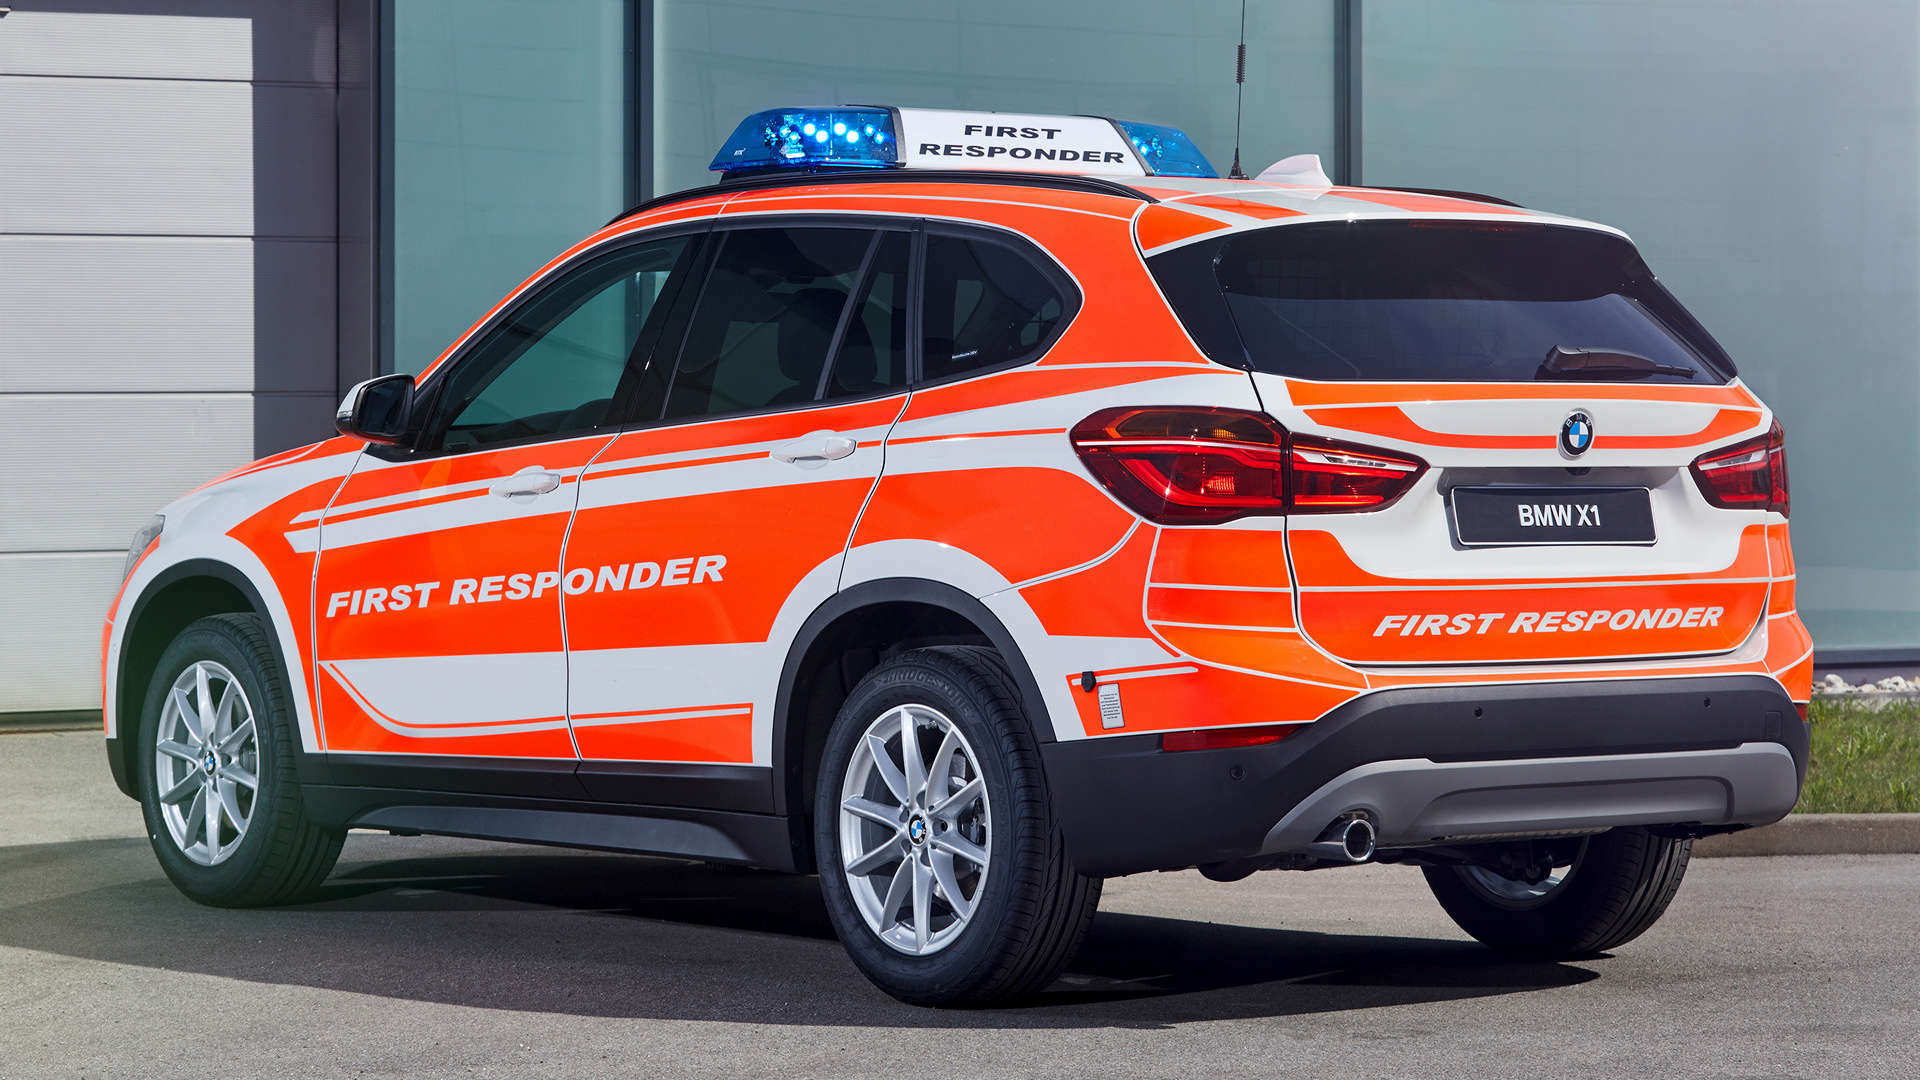 BMW X1 First Responder and HD Image